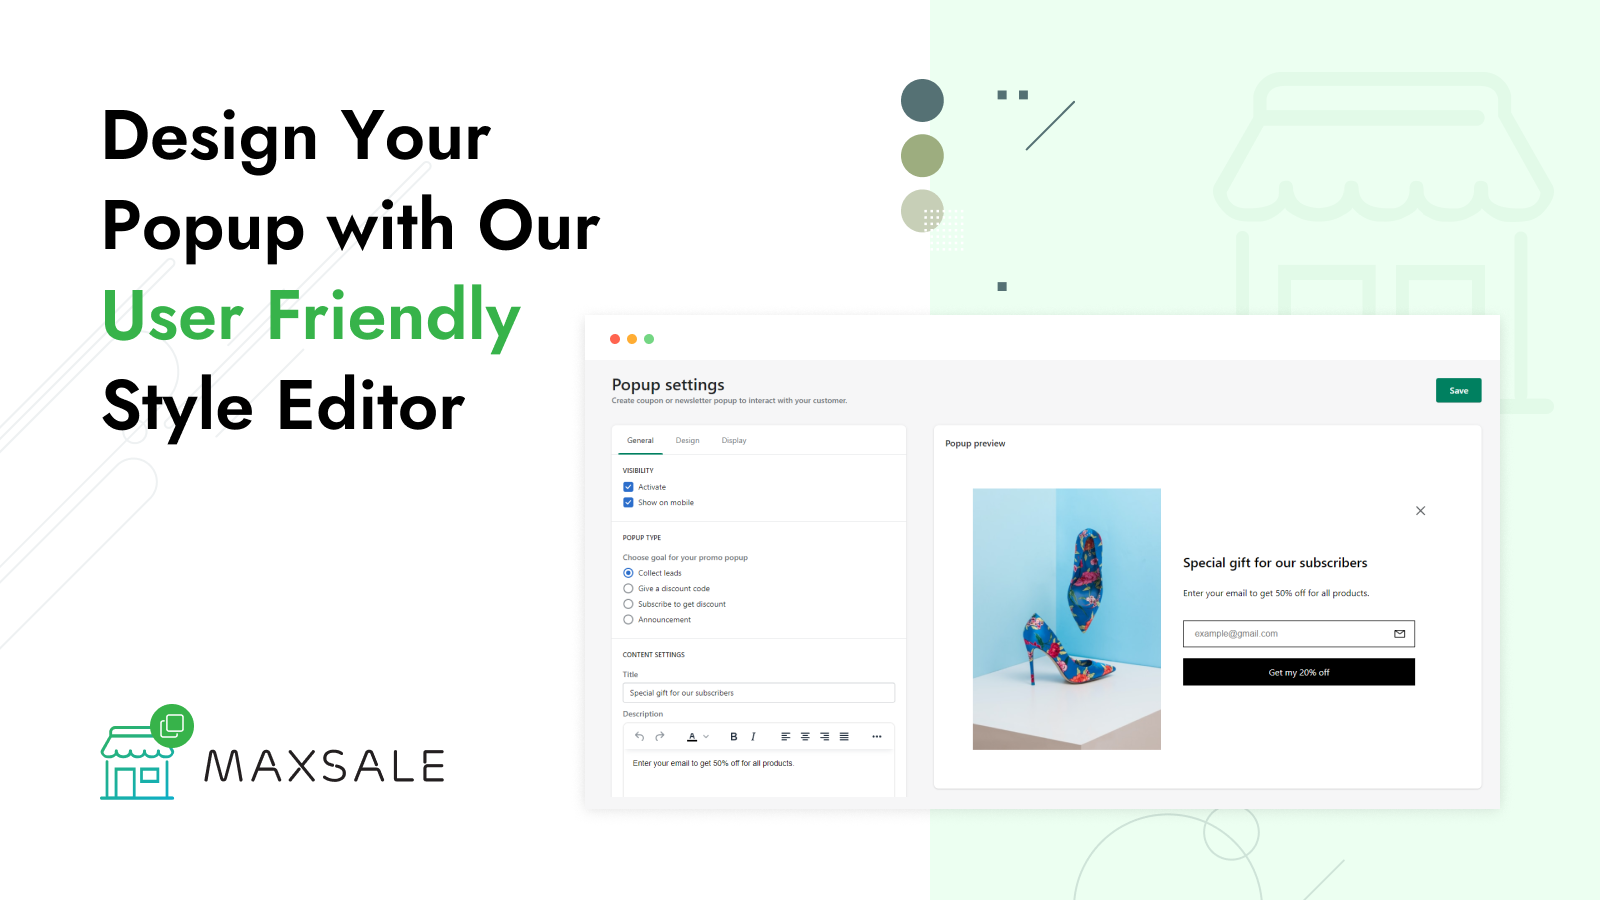 Design Your Popup with Our User Friendly Style Editor